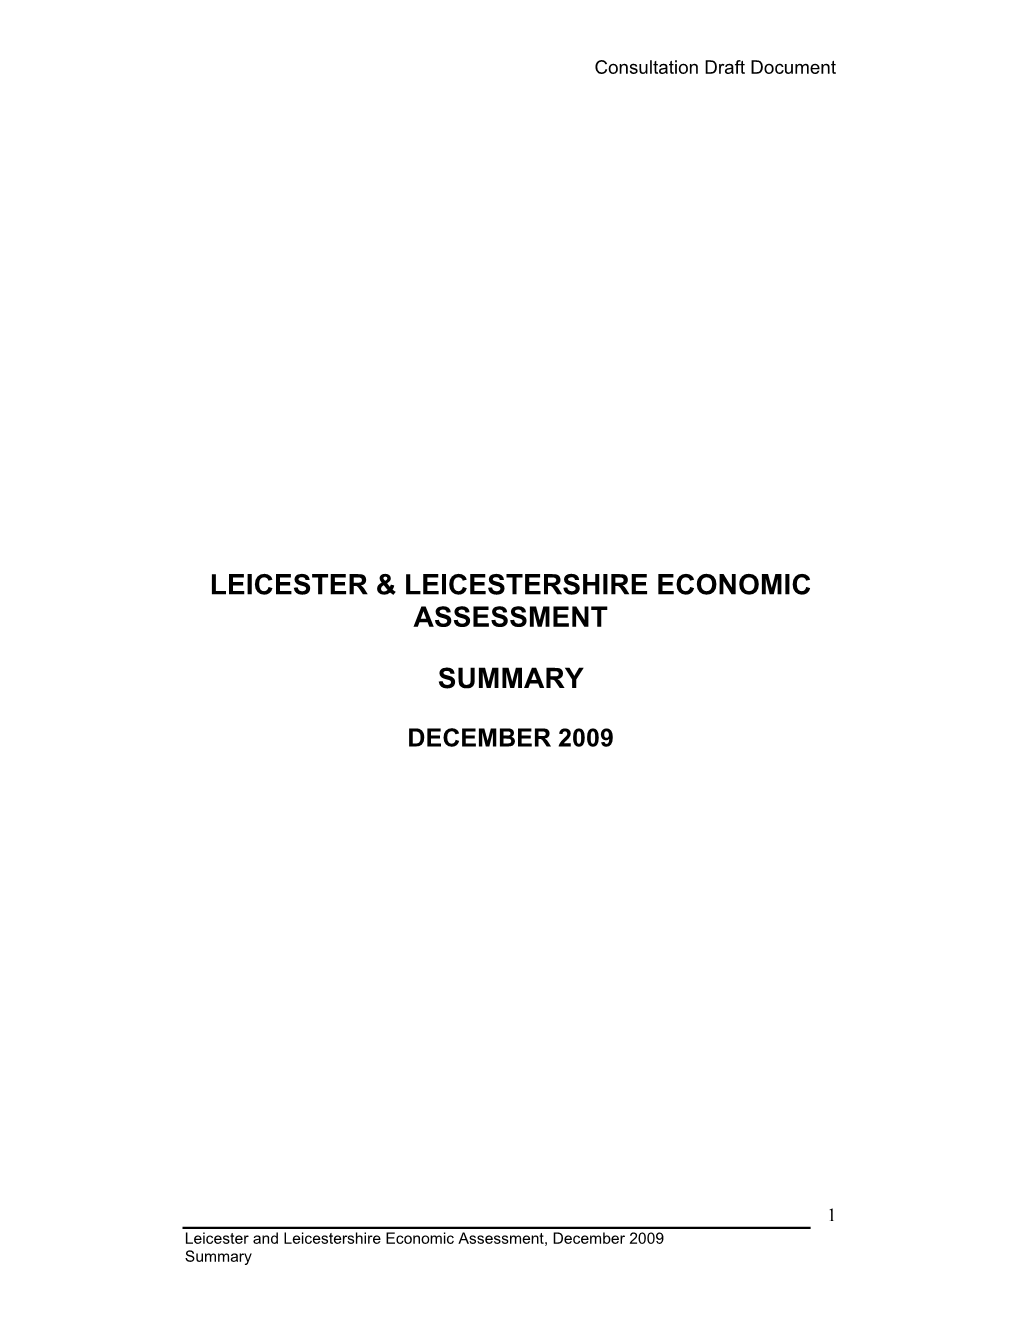 Leicester & Leicestershire Economic Assessment Summary